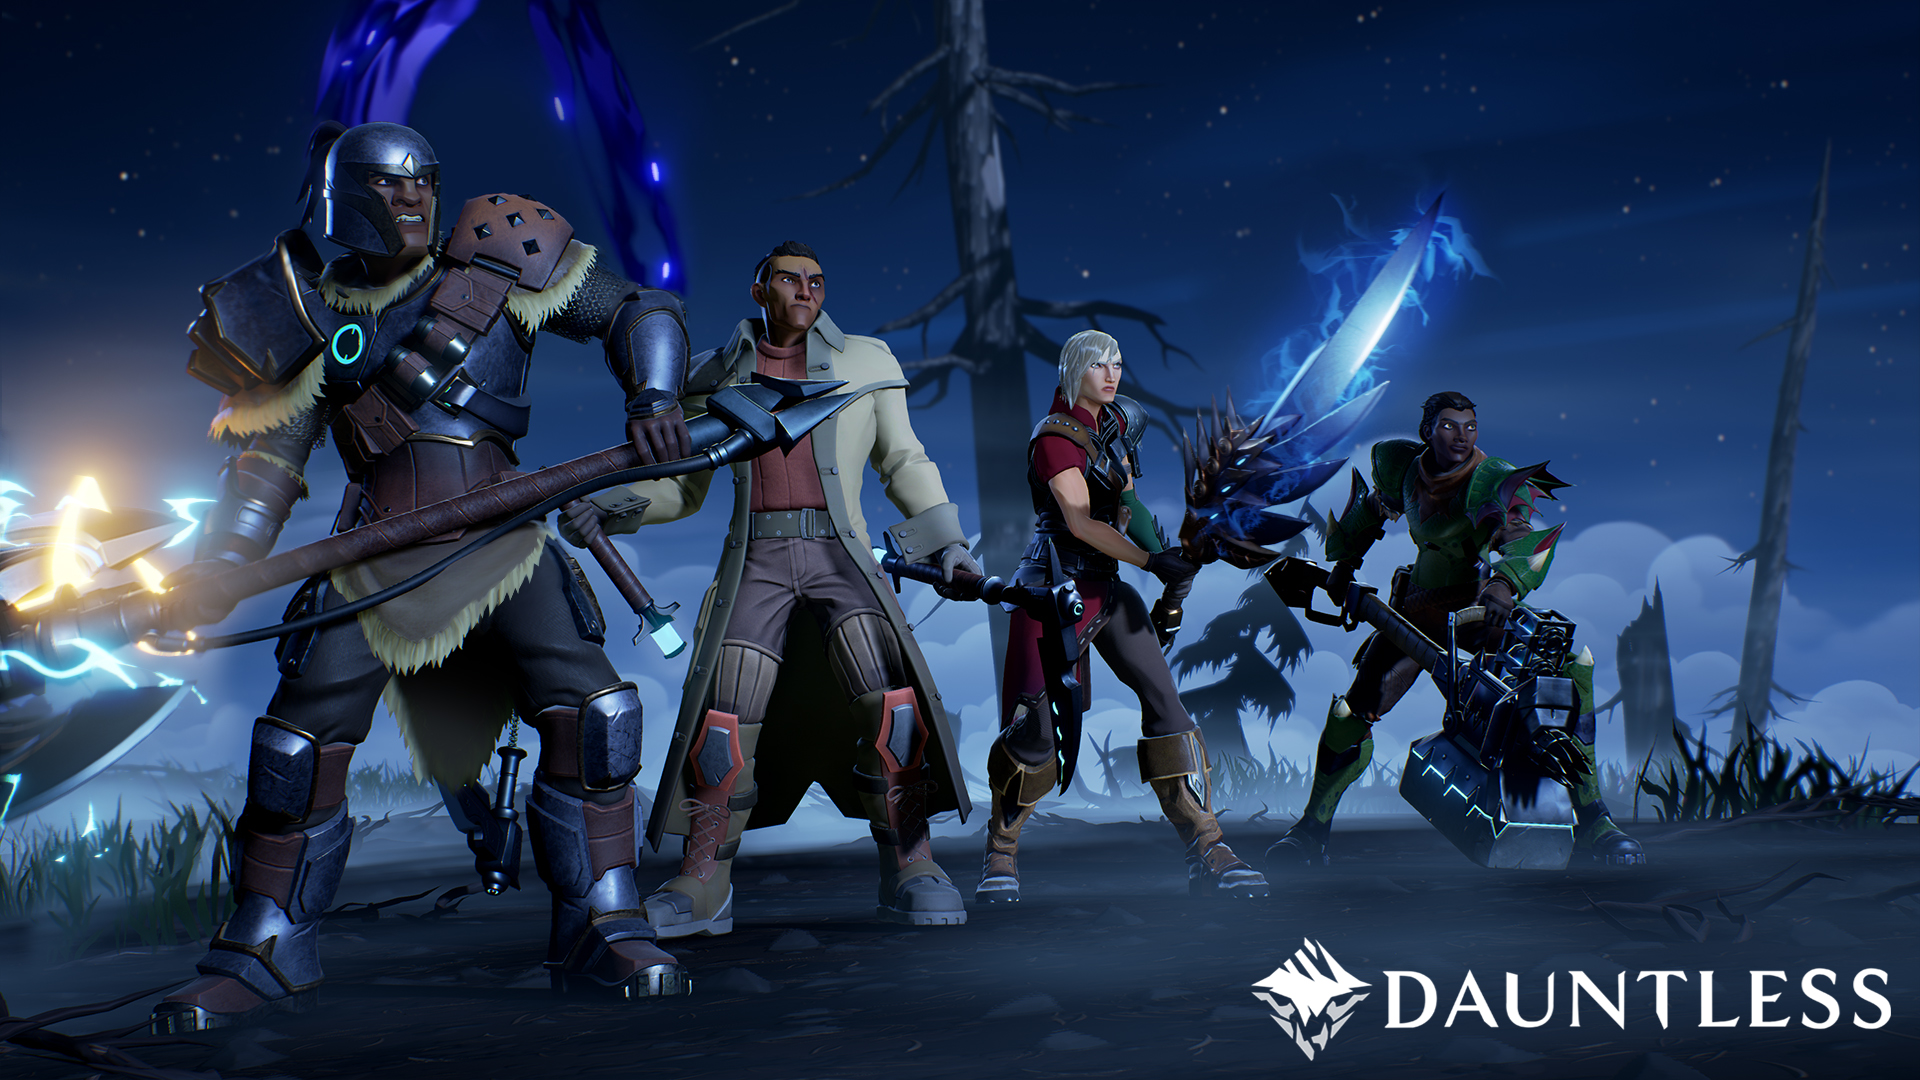 PAX East 2018 - Hands on with Dauntless